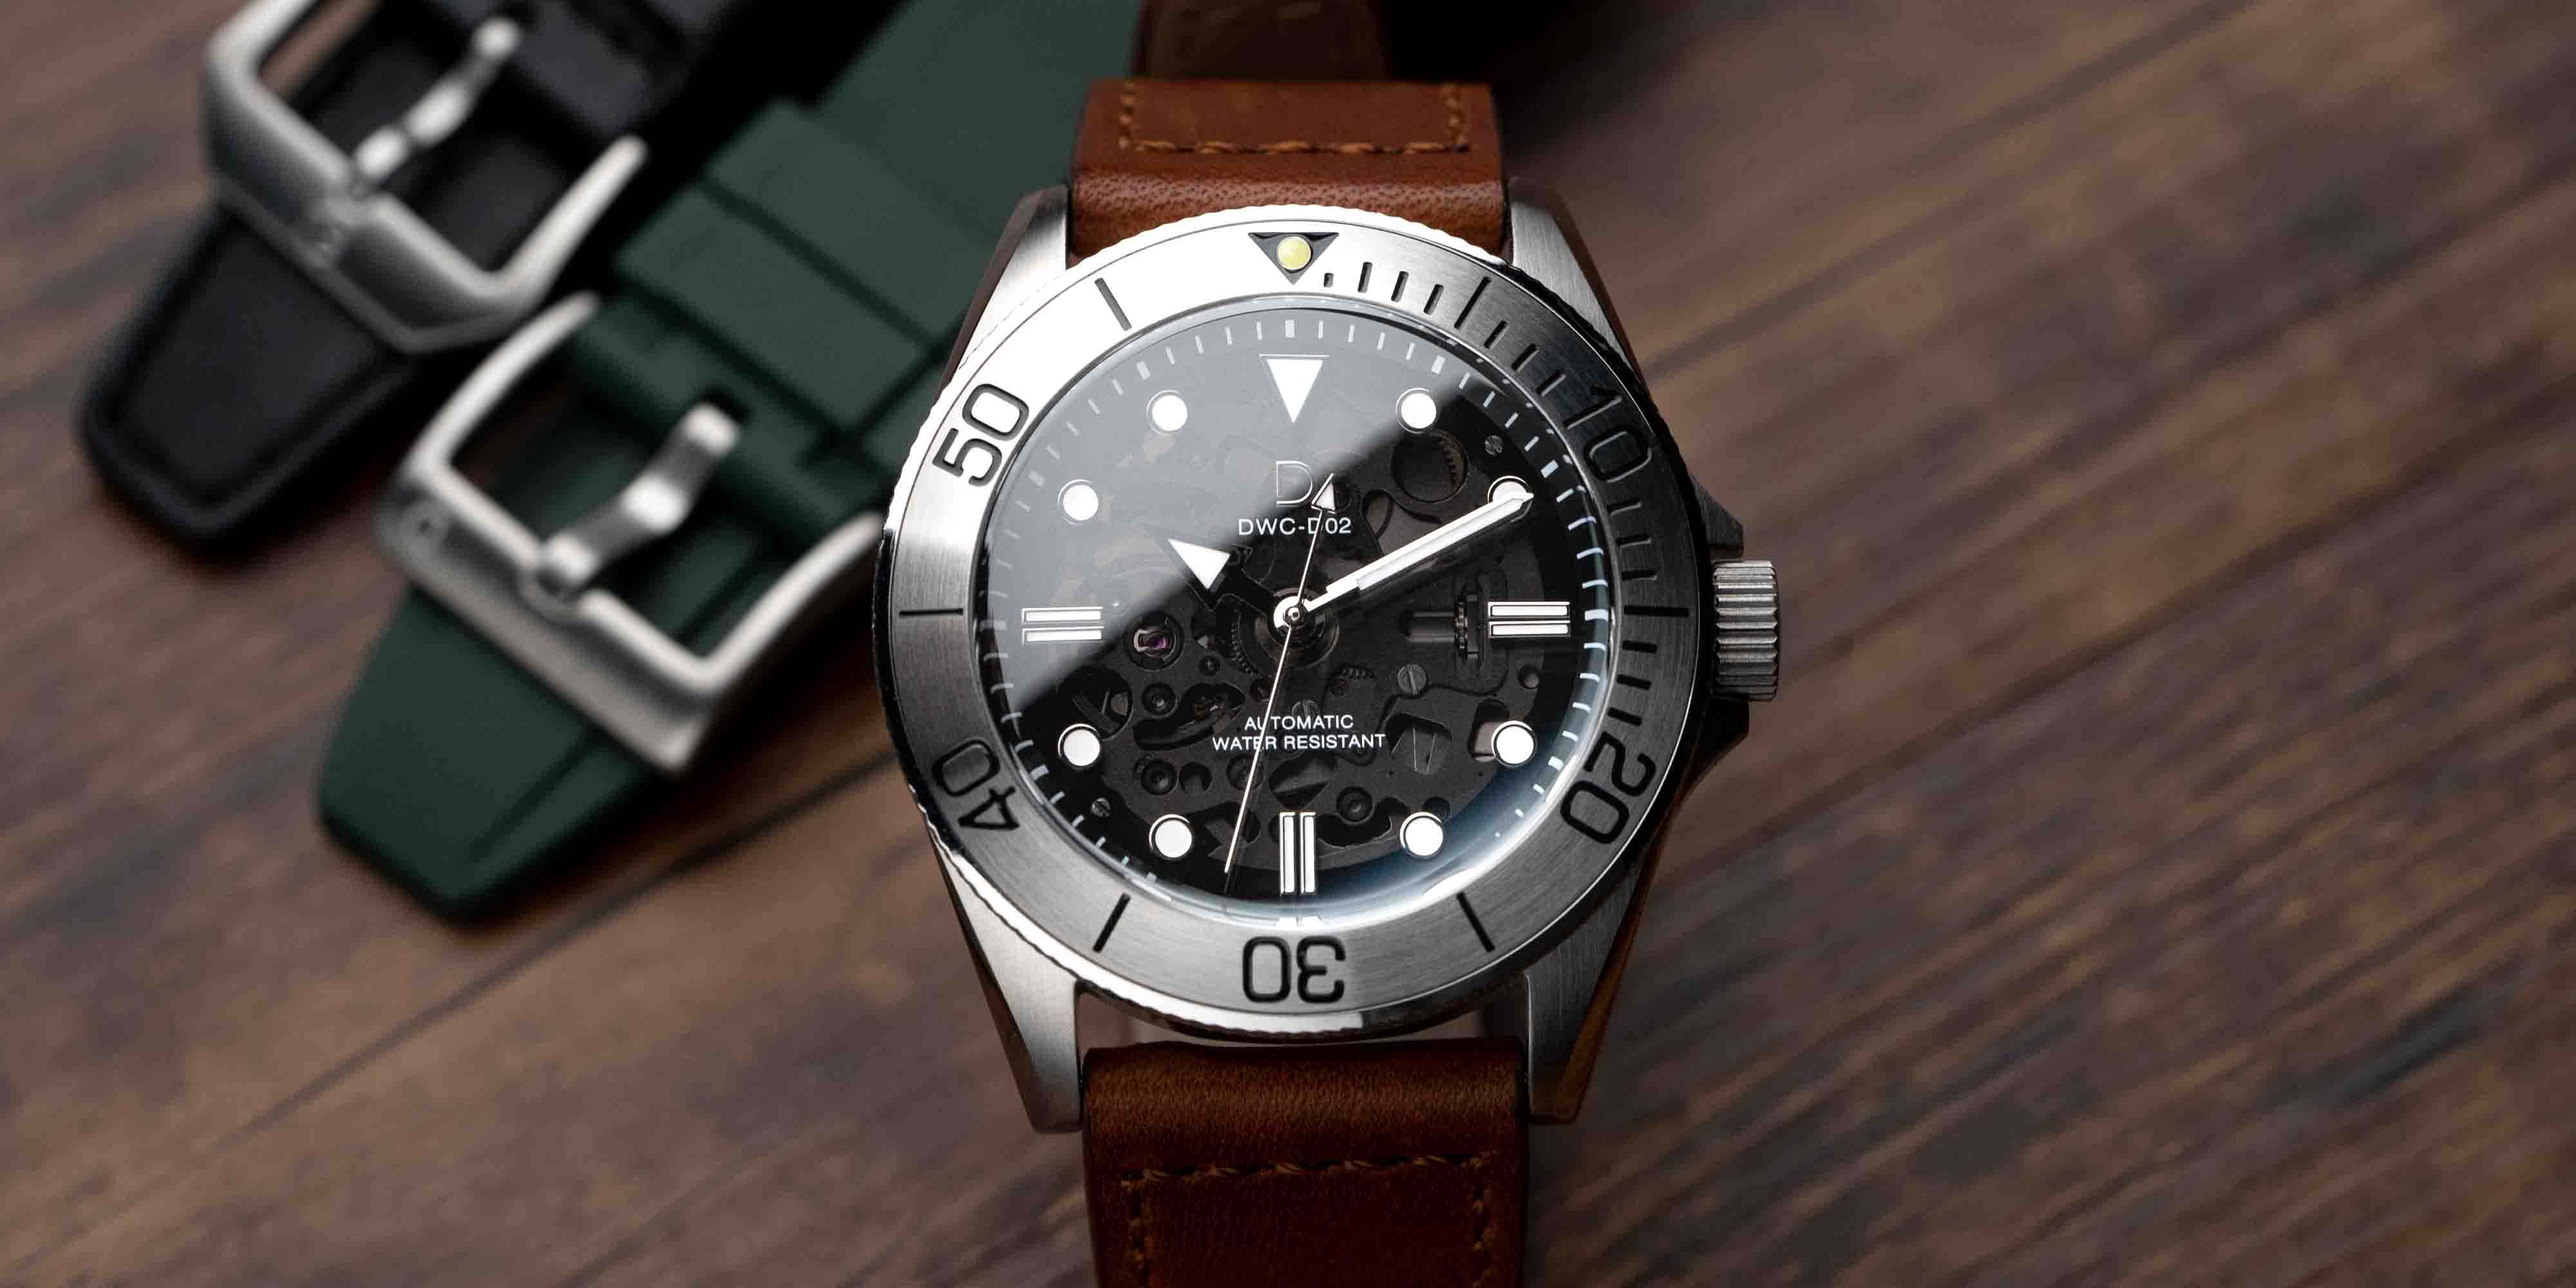 DIY Watch Club diver with sapphire dial and stainless steel bezel